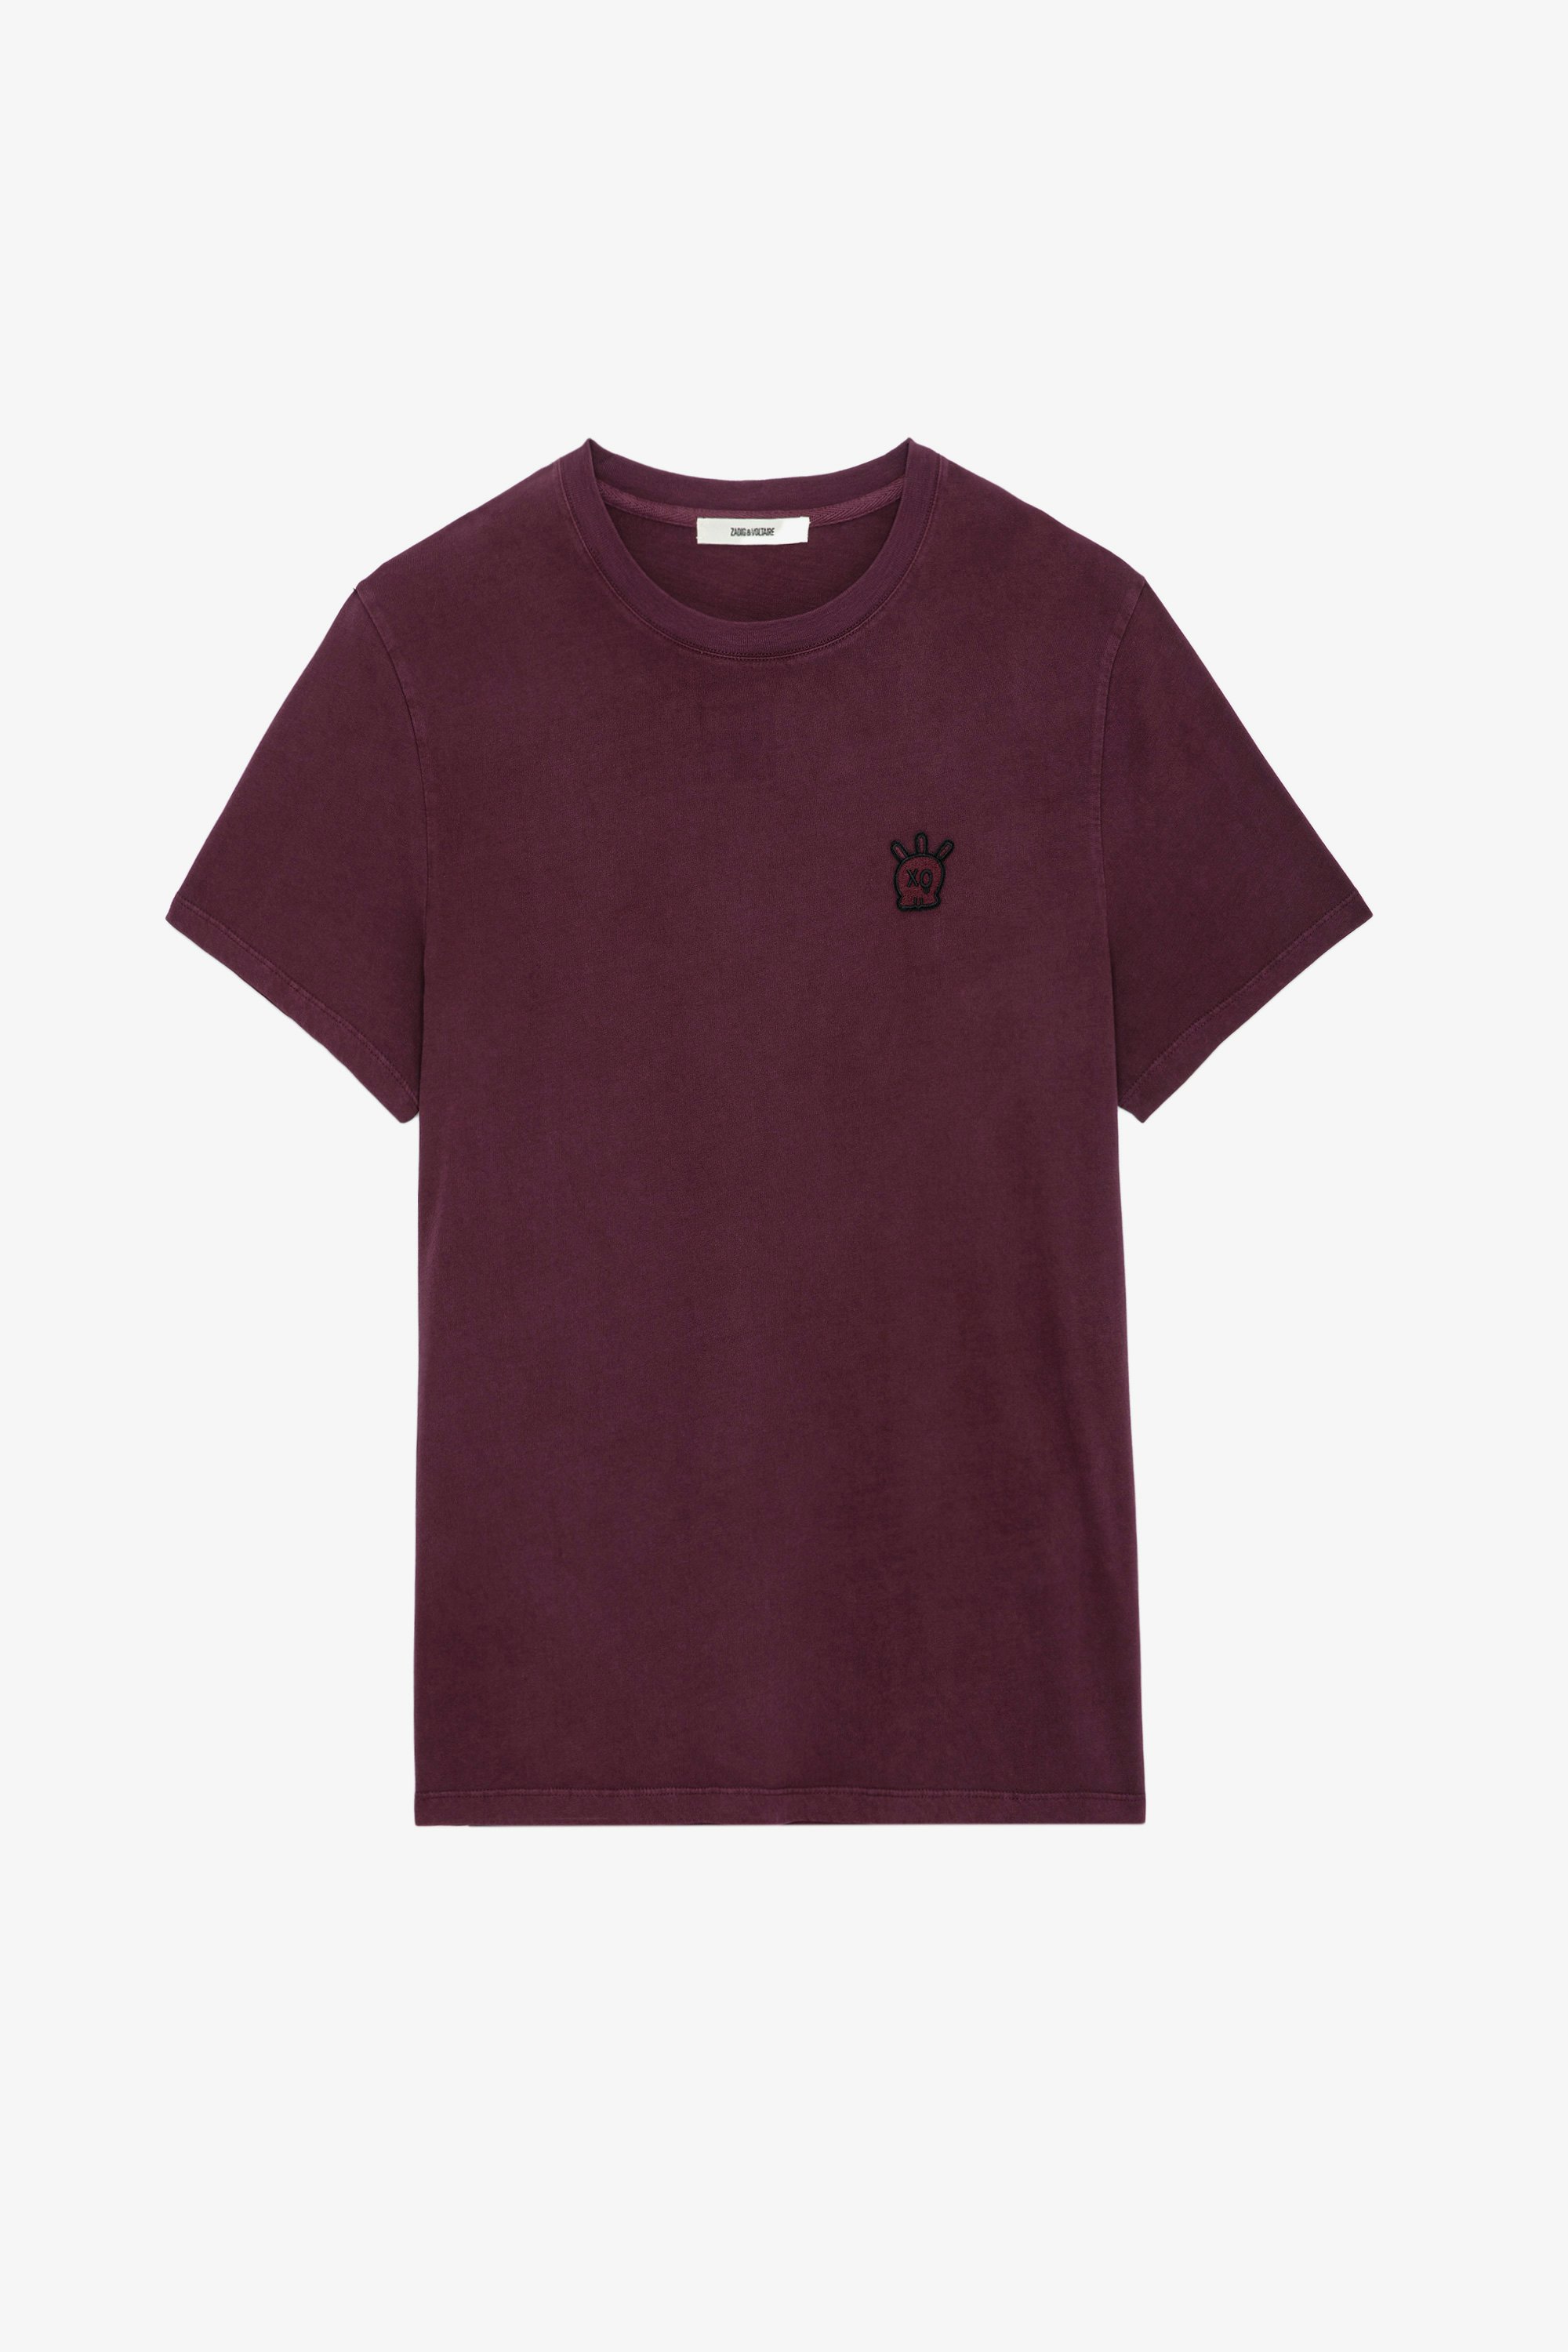 Tommy Skull XO T-shirt - Burgundy cotton round-neck T-shirt with short sleeves and Skull XO patch.